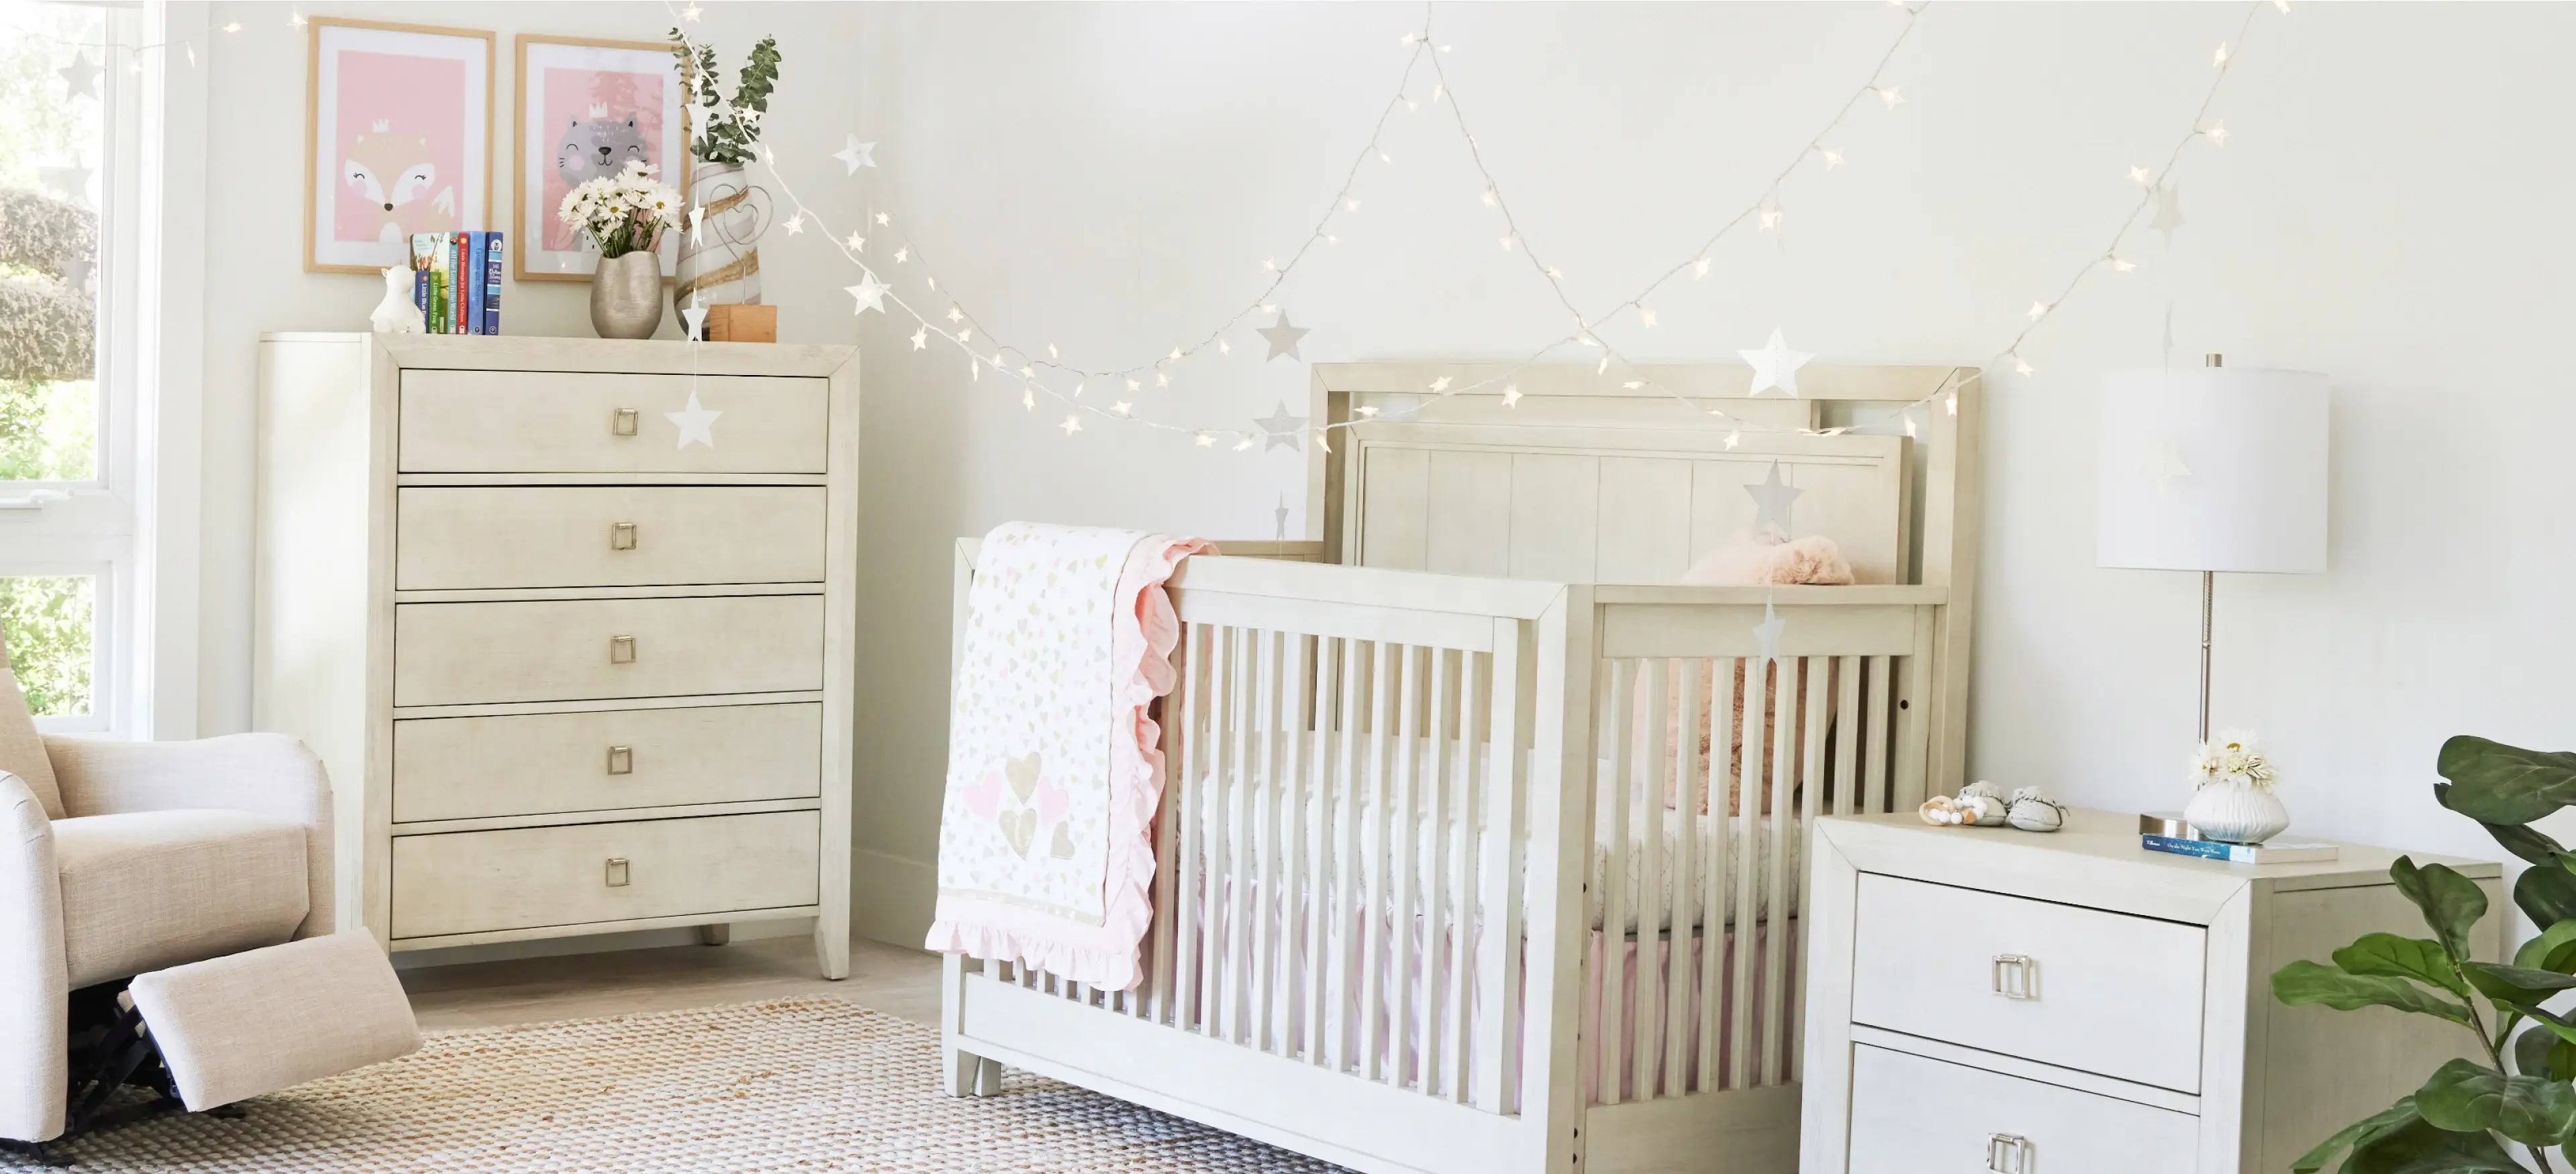 The Perfect Nursery: A Balance of Style and Function for Your Newborn